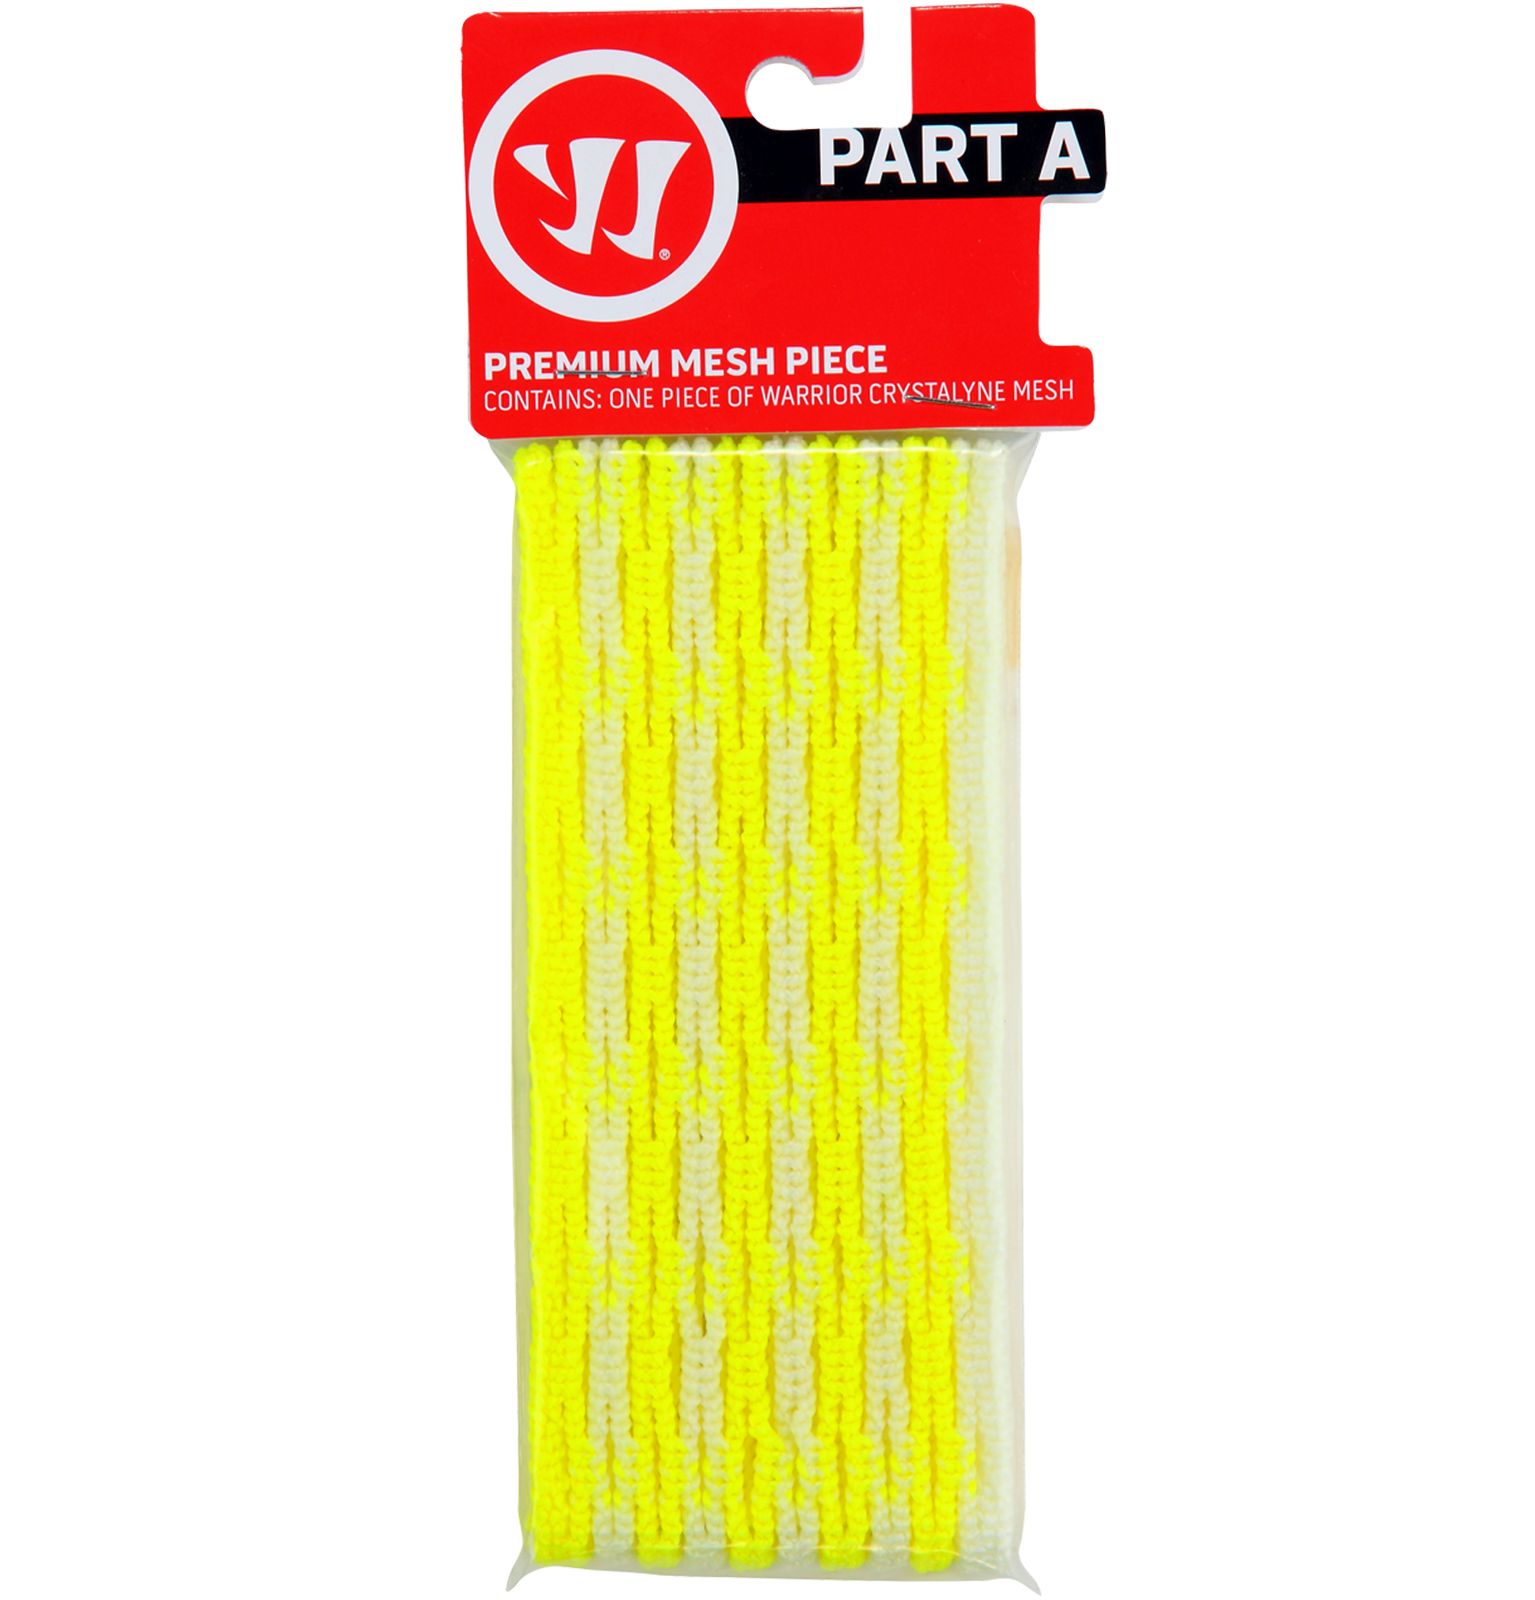 Crystalline mesh, Neon Yellow with White image number 0